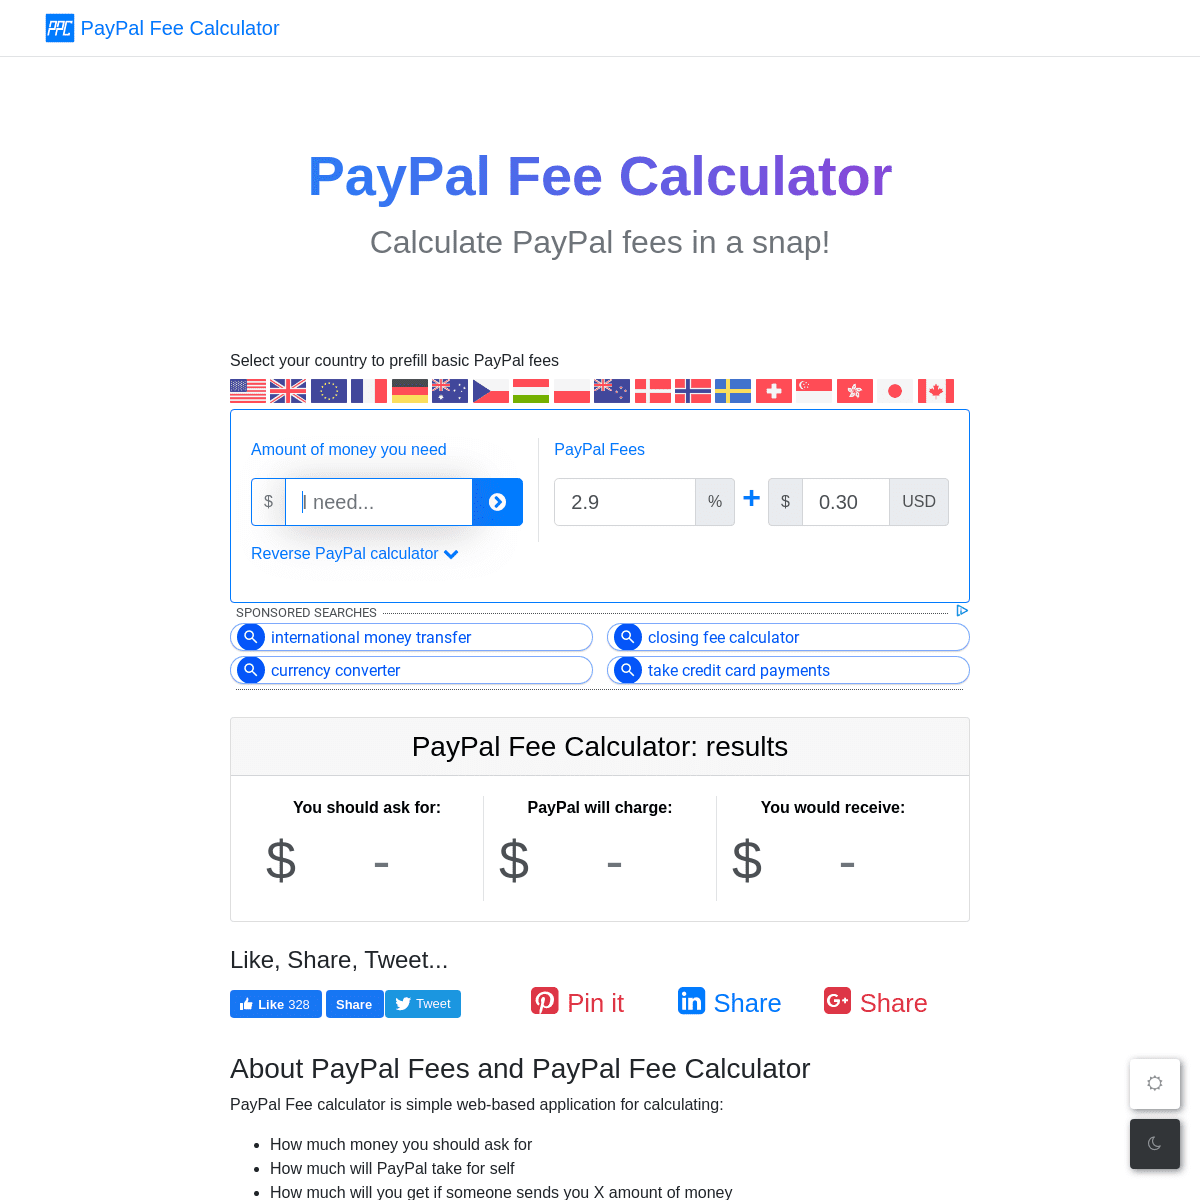 A complete backup of ppcalculator.com